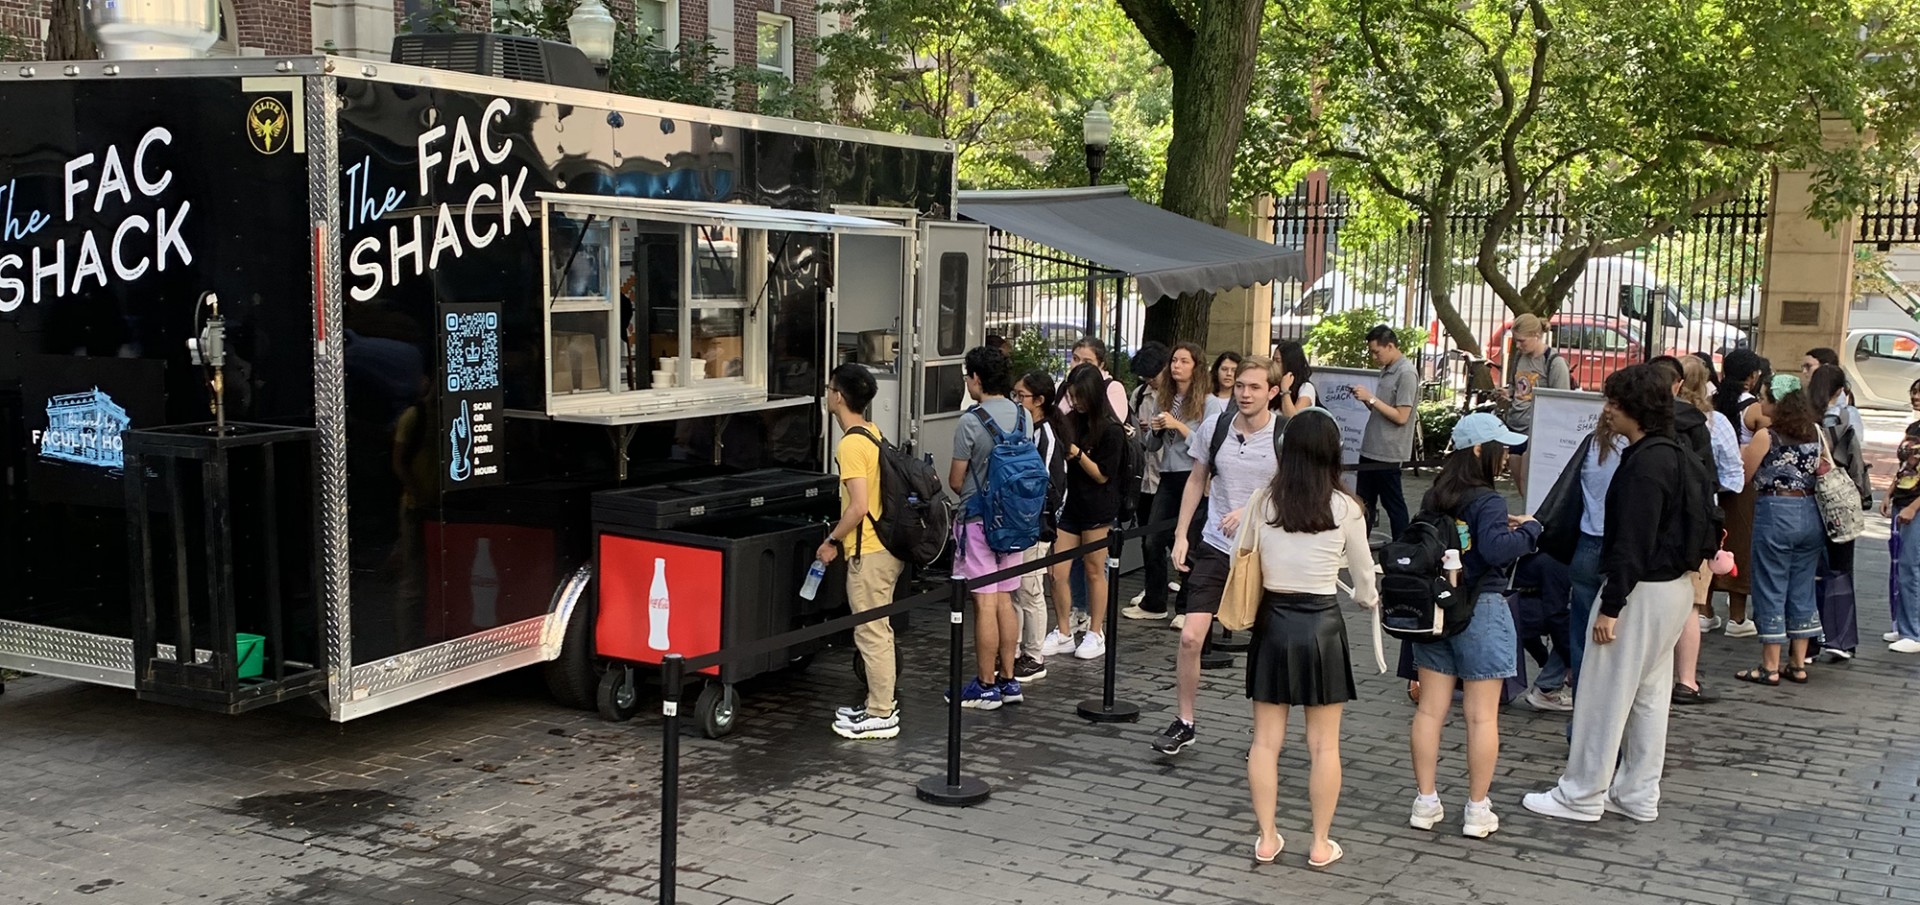 Students line up outside the Fac Shack Food Truck on Wein Courtyard